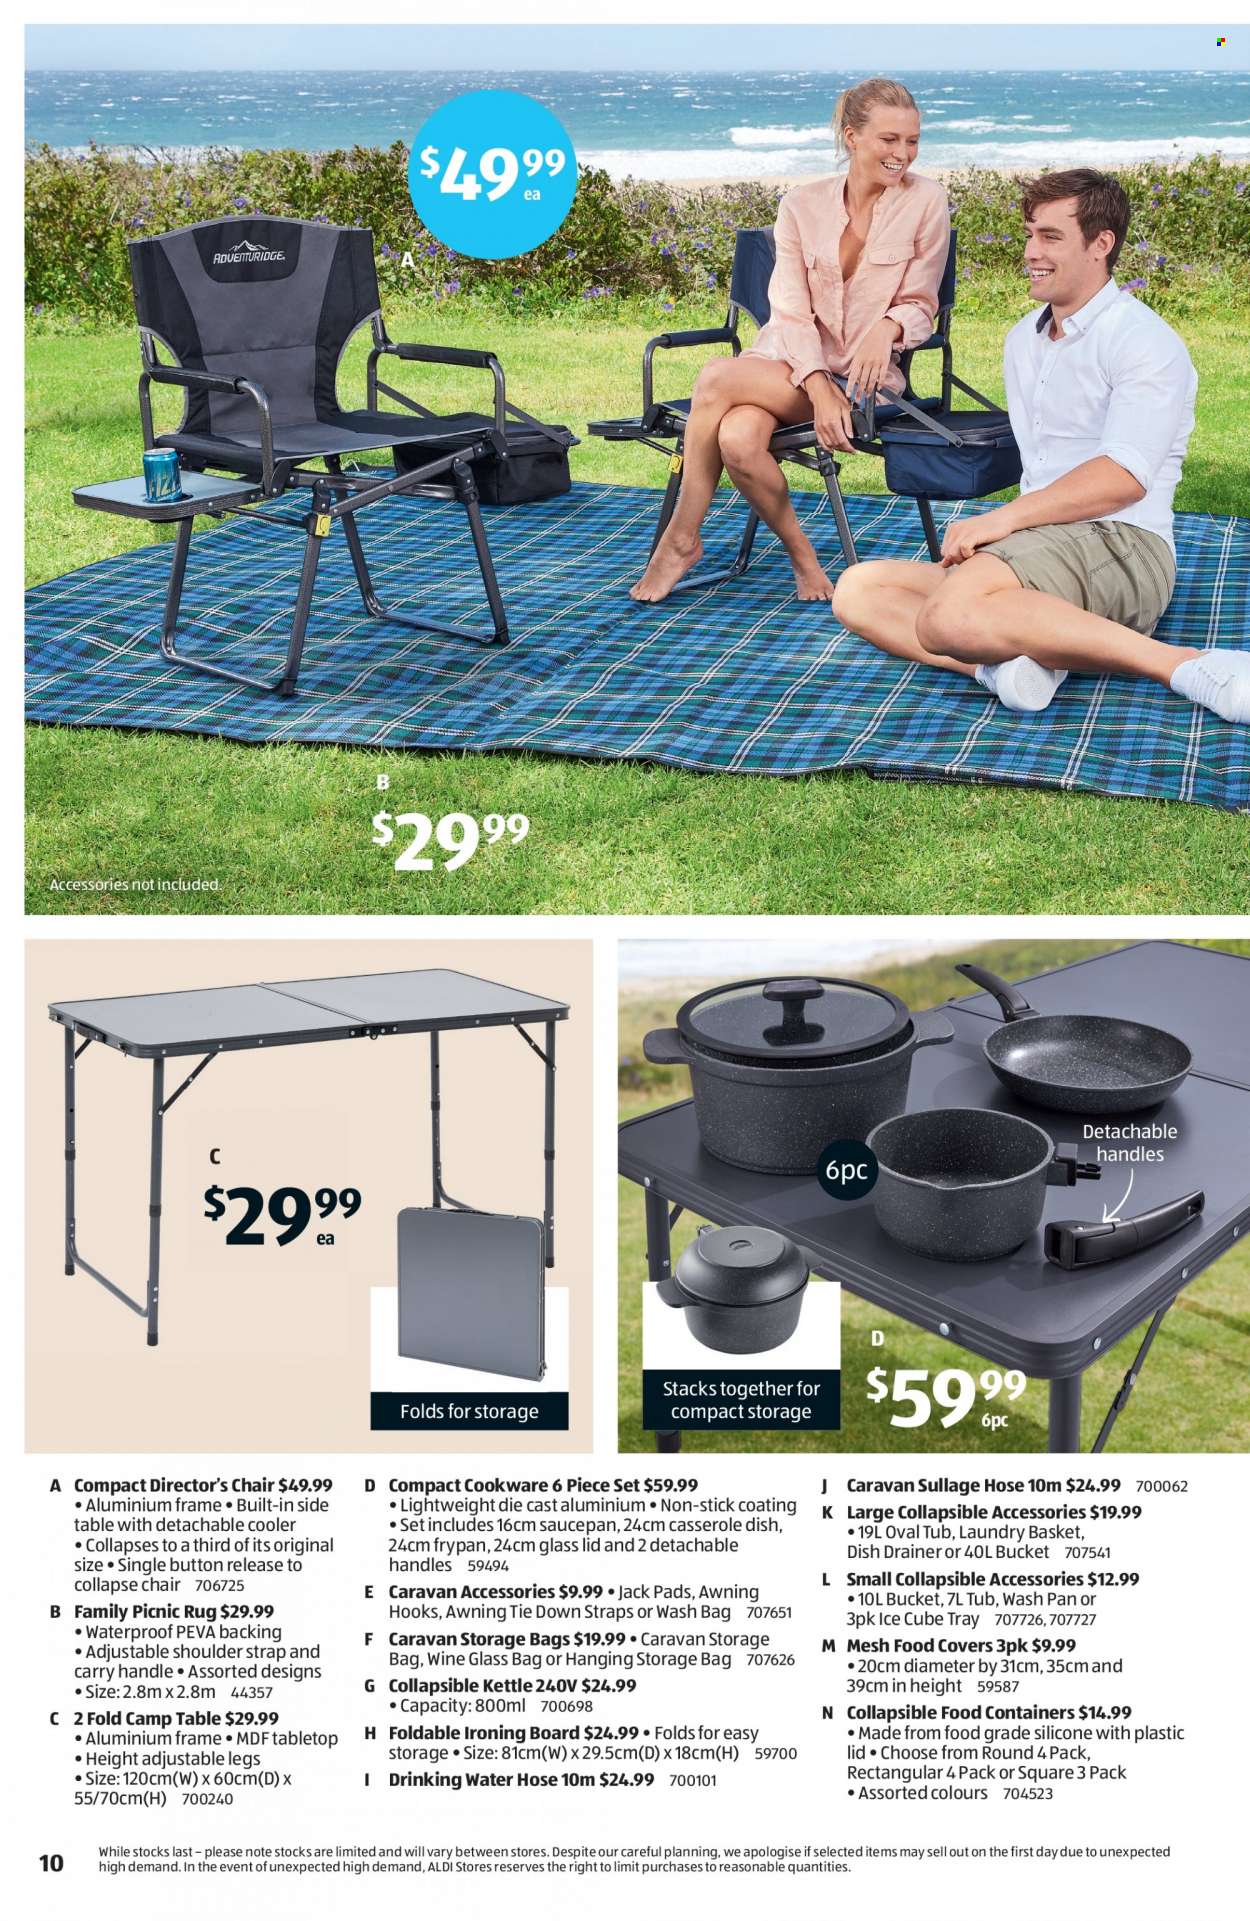 ALDI Catalogue - 19 May 2022 - 25 May 2022 - Sales products - kettle, basket, storage bag, ironing board, cookware set, lid, wine glass, pan, casserole, saucepan, frypan, table, garden hose, strap, caravan accessories, chair, picnic rug. Page 10.